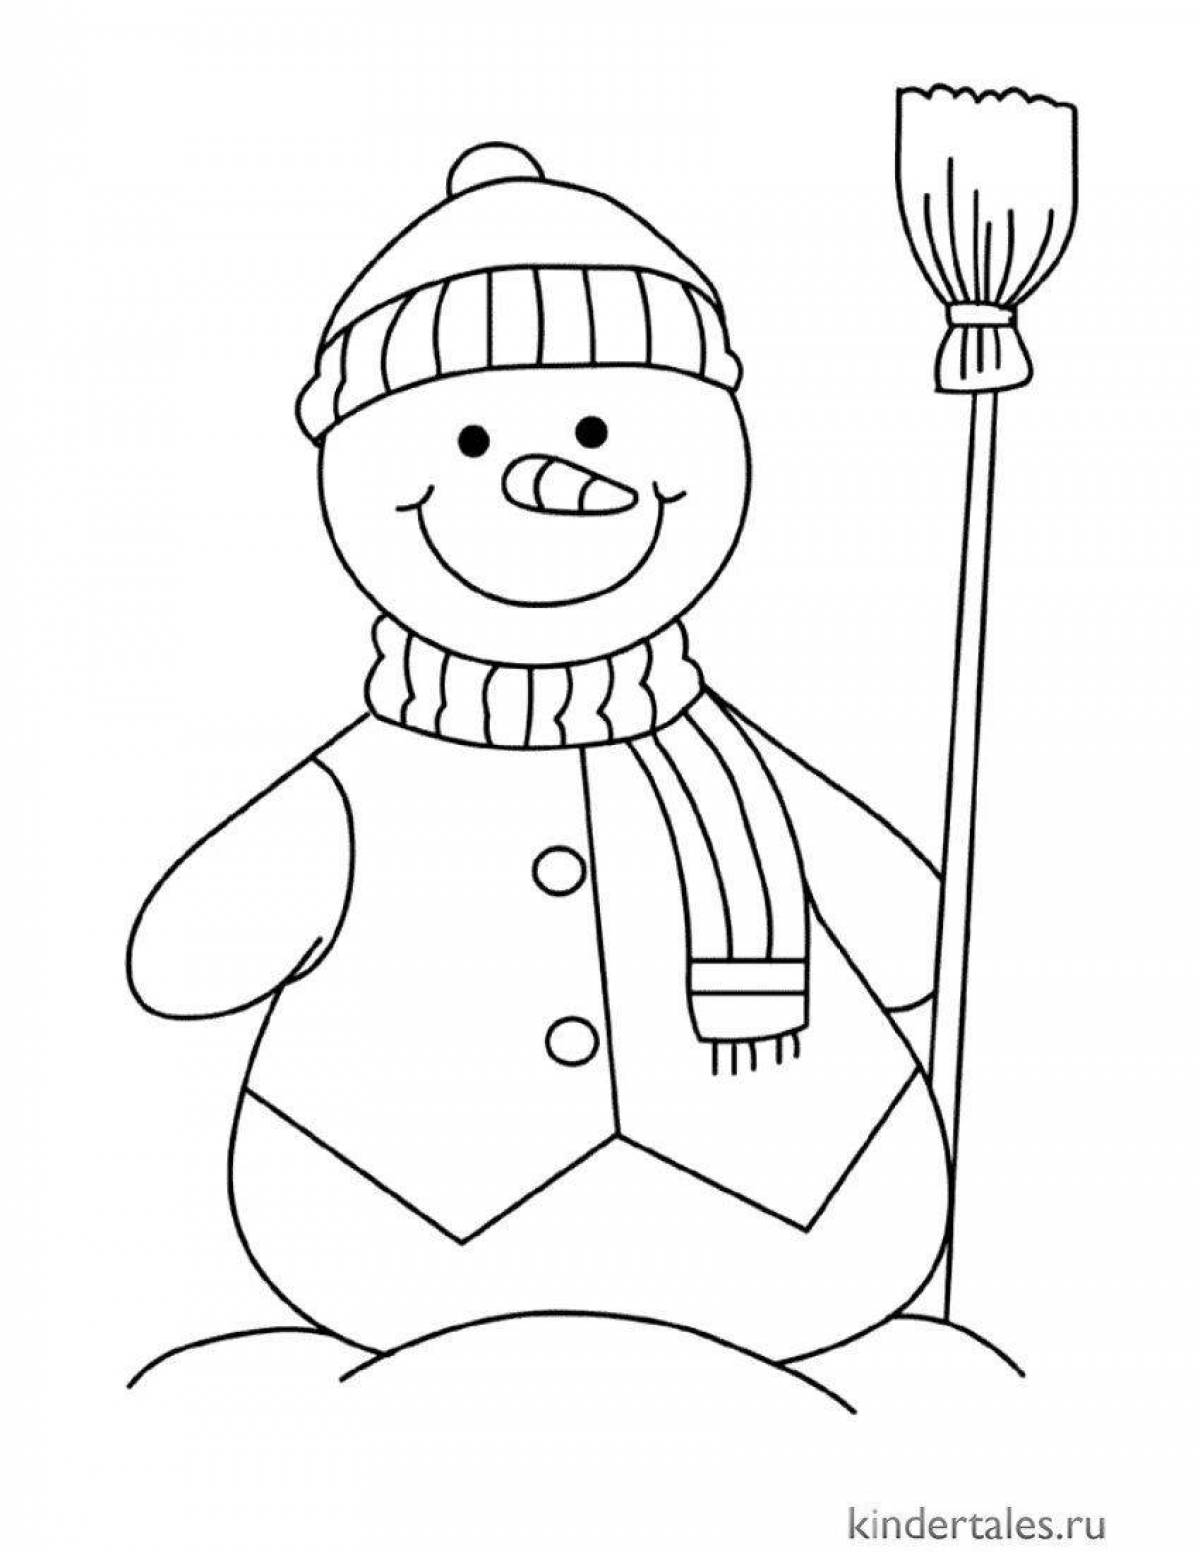 Exquisite snowman coloring book for kids